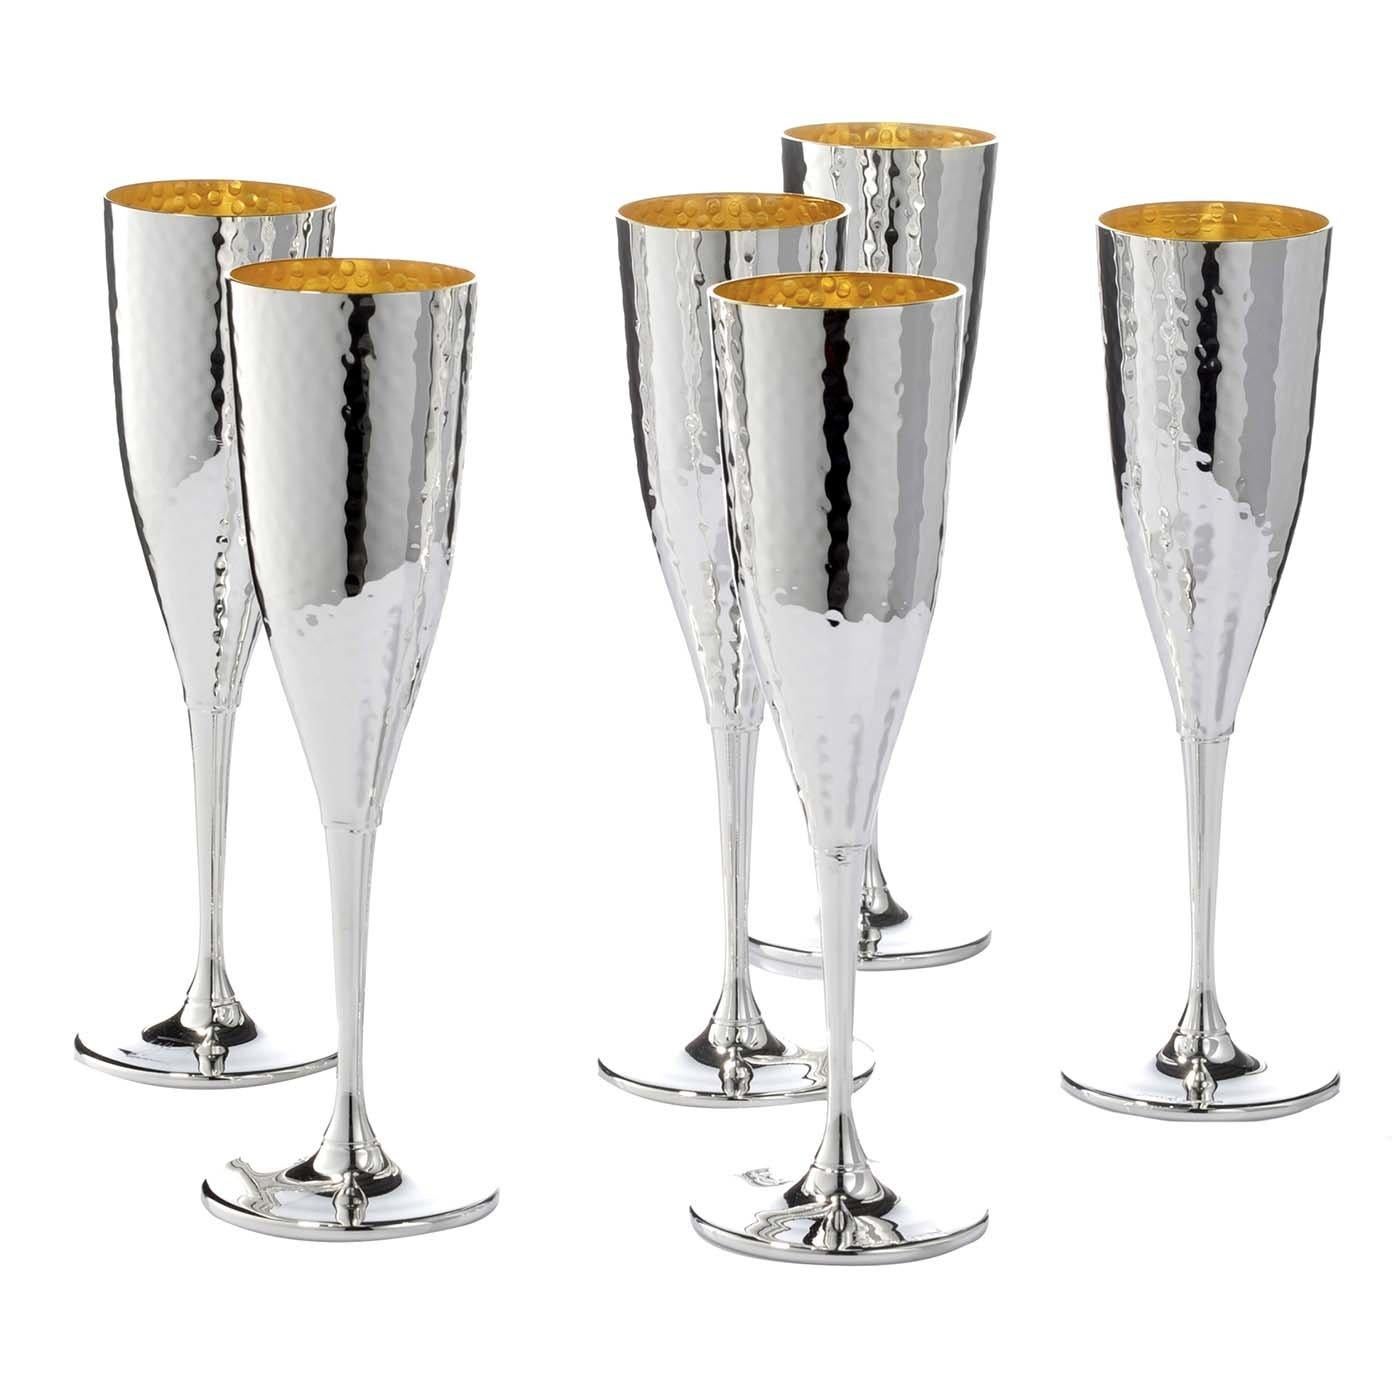 Designed to complement the wine decanters from the same series with a hand-hammered finish, this set of six flutes is silver-plated with an interior gold layer that adds a luxurious contrast of strong visual interest. A sophisticated and thoughtful